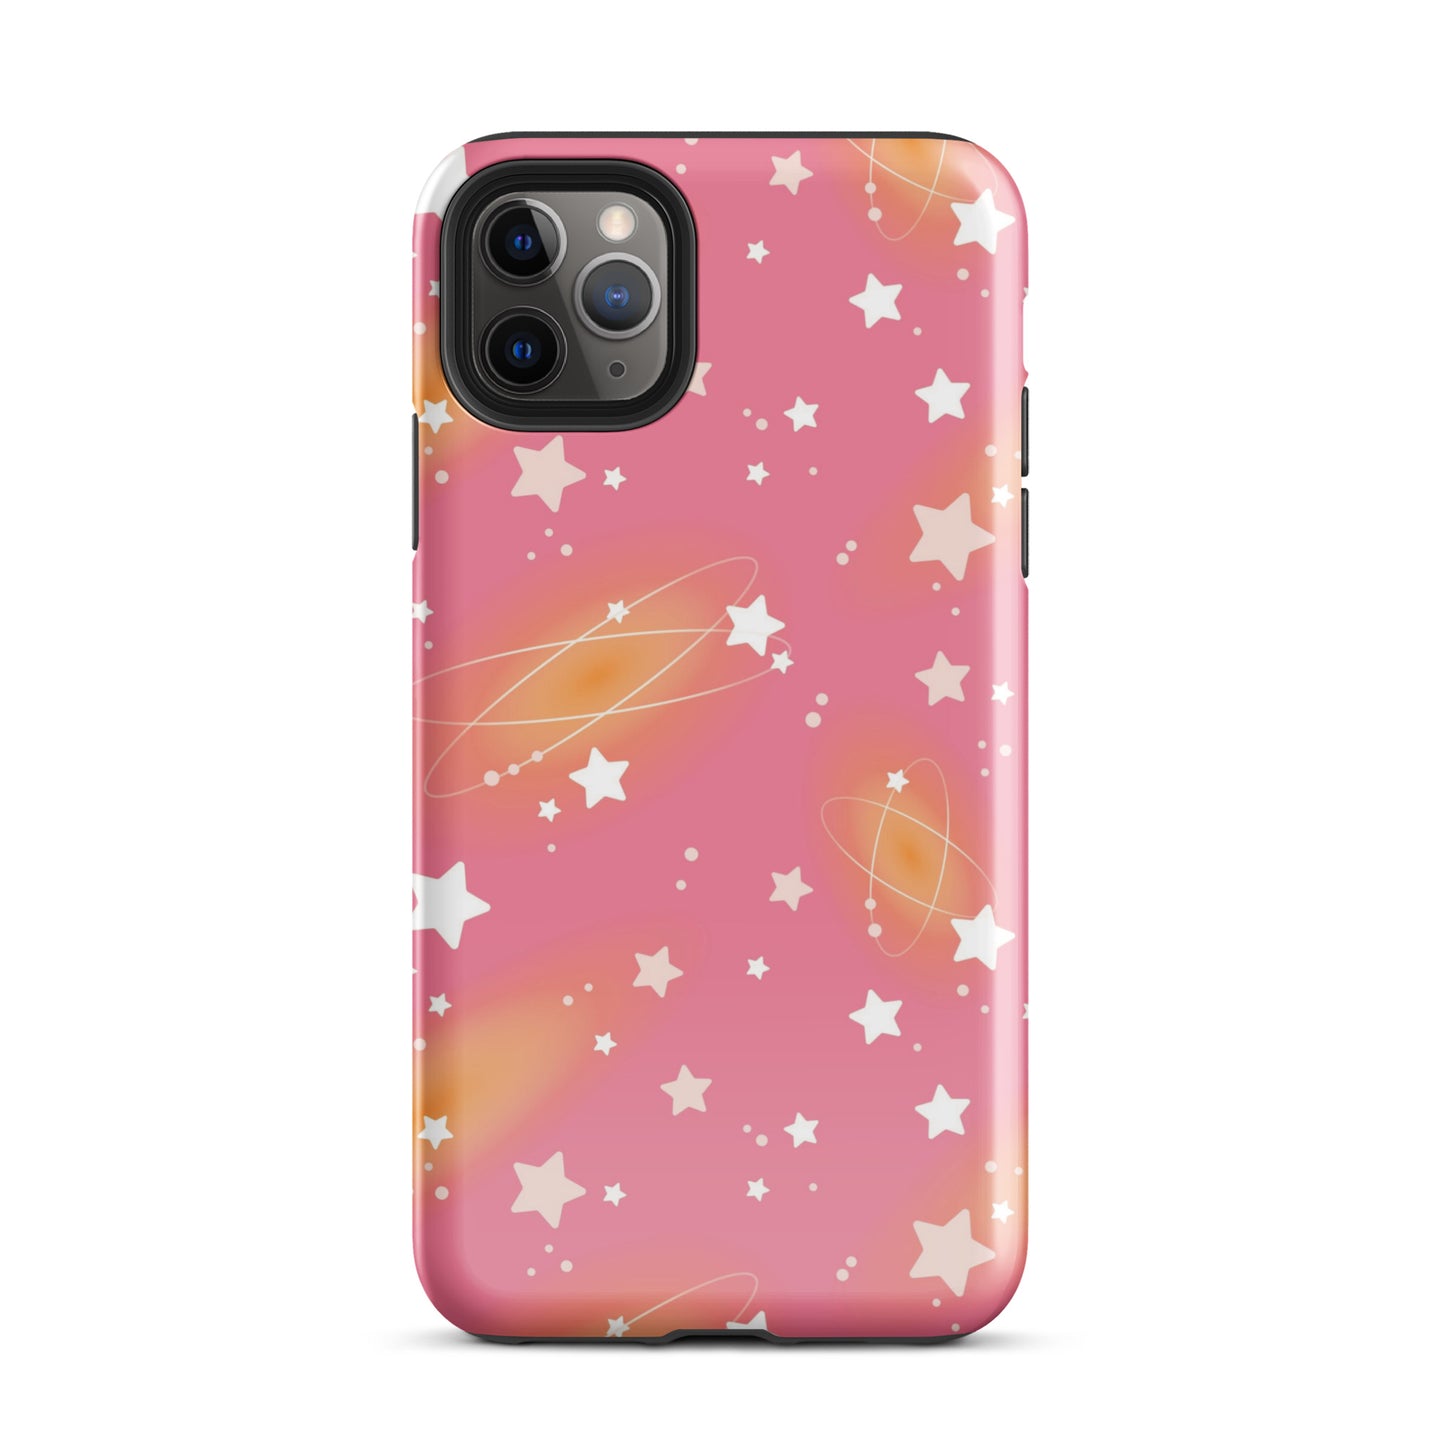 Star Aura iPhone Case iPhone 11 Pro Max Glossy